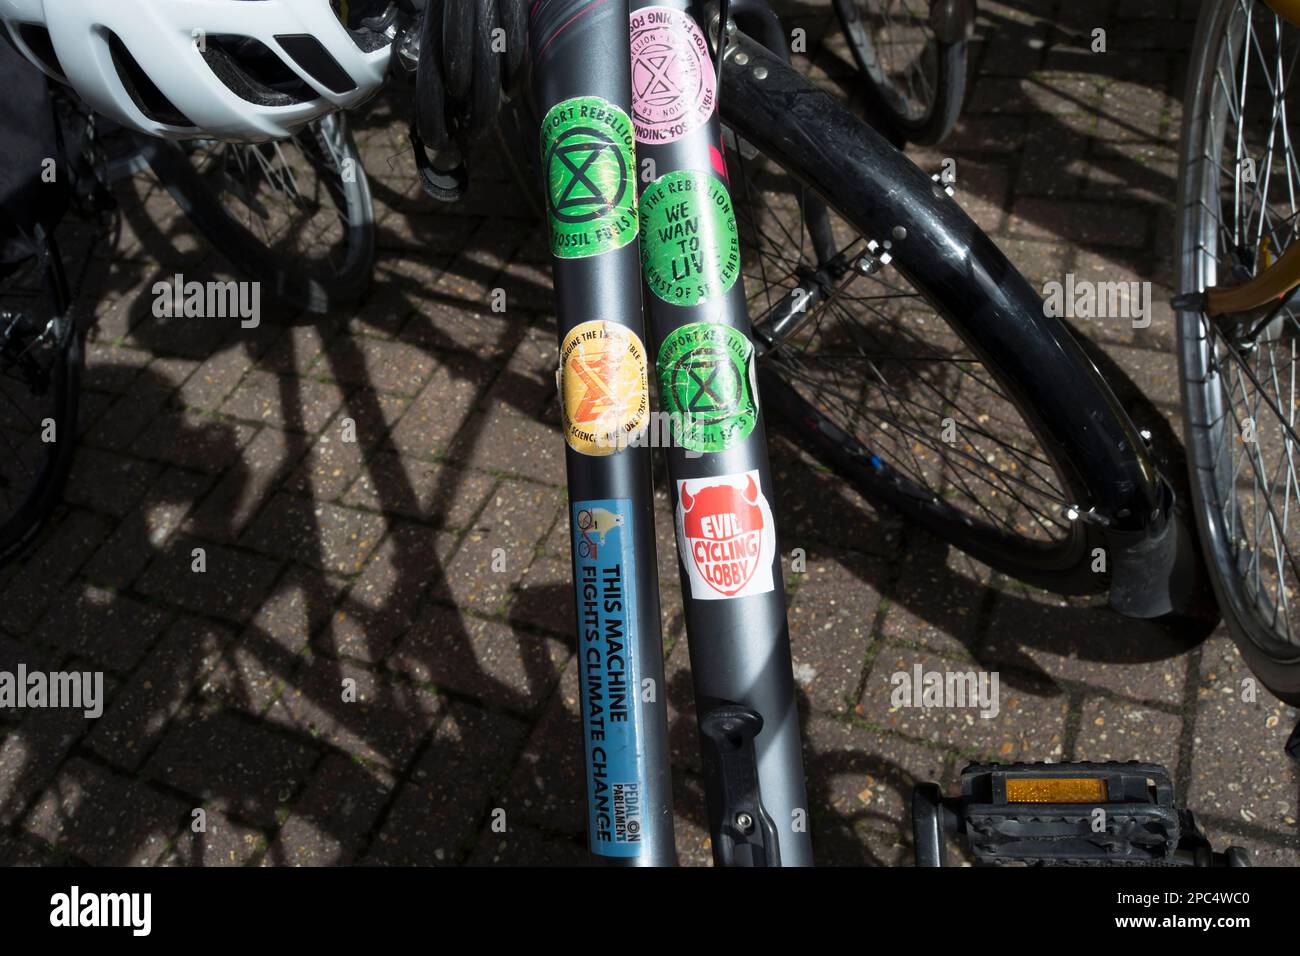 environment and climate change related stickers on a parked bicycle  including those for extinction rebellion and pedal on parliament Stock Photo